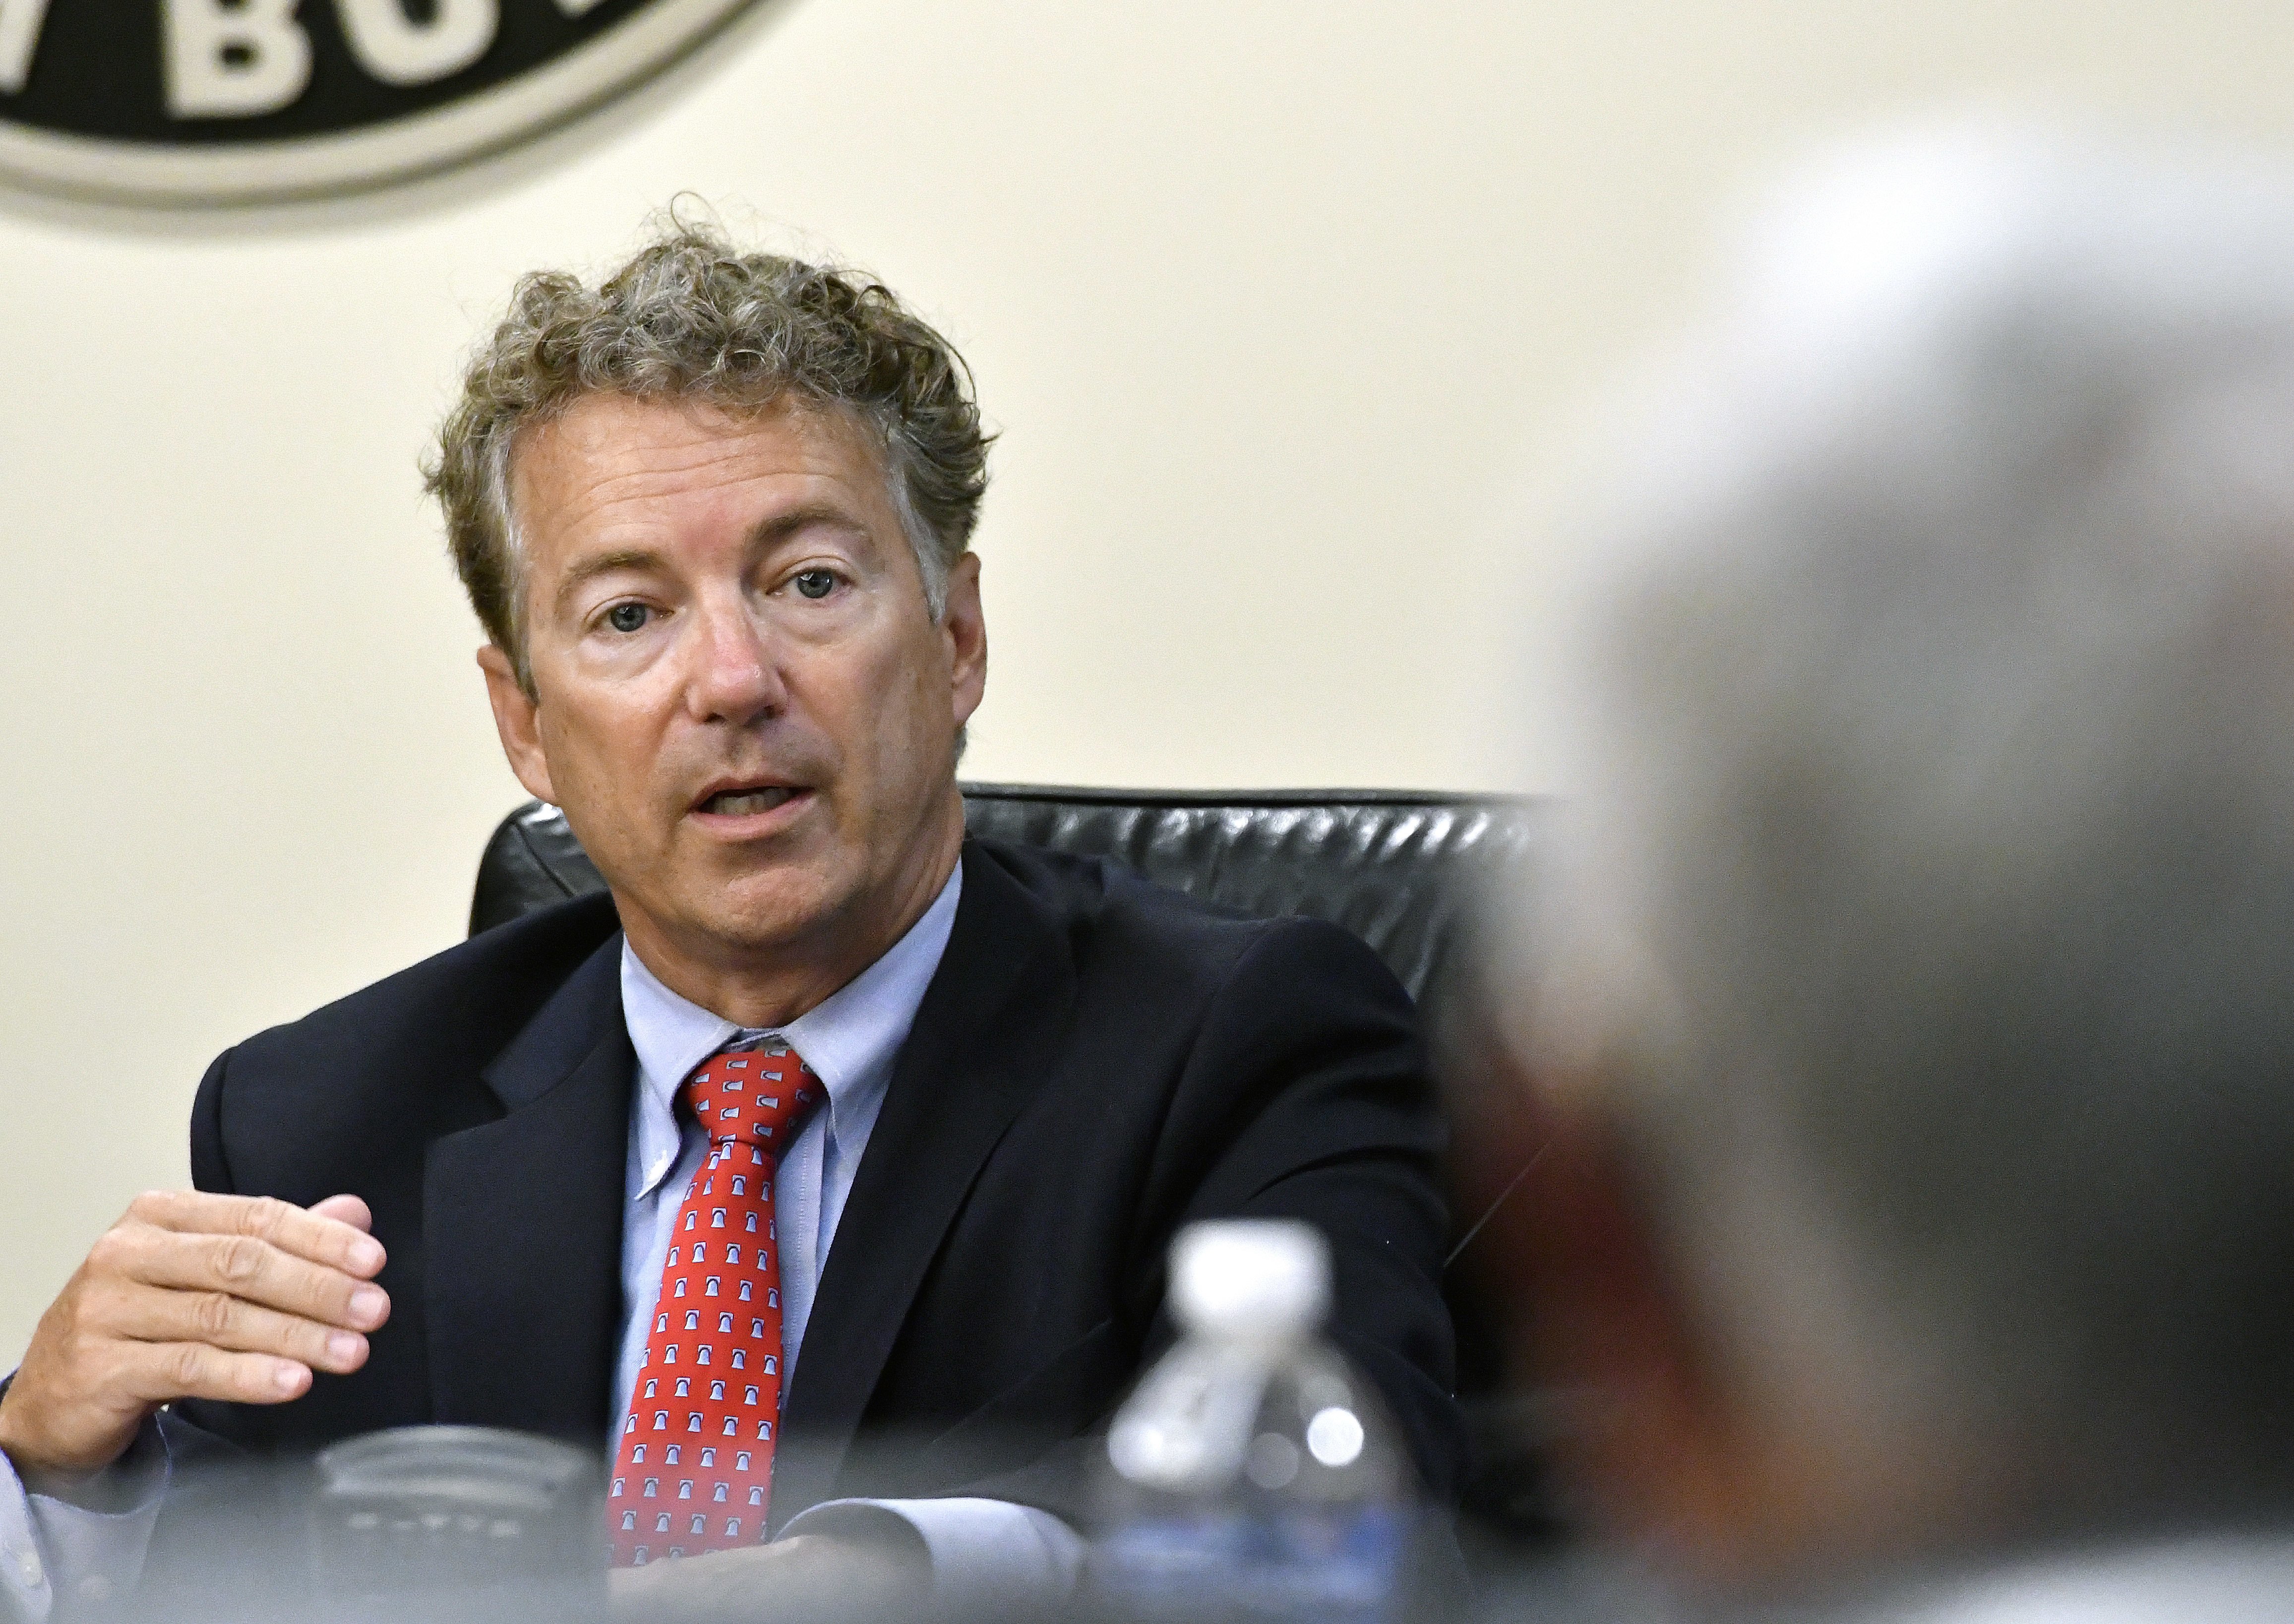 Rand Paul during a candidates forum at the Kentucky Farm Bureau headquarters, in Louisville, KY, on Aug. 25, 2016. (Timothy D. Easley—AP)